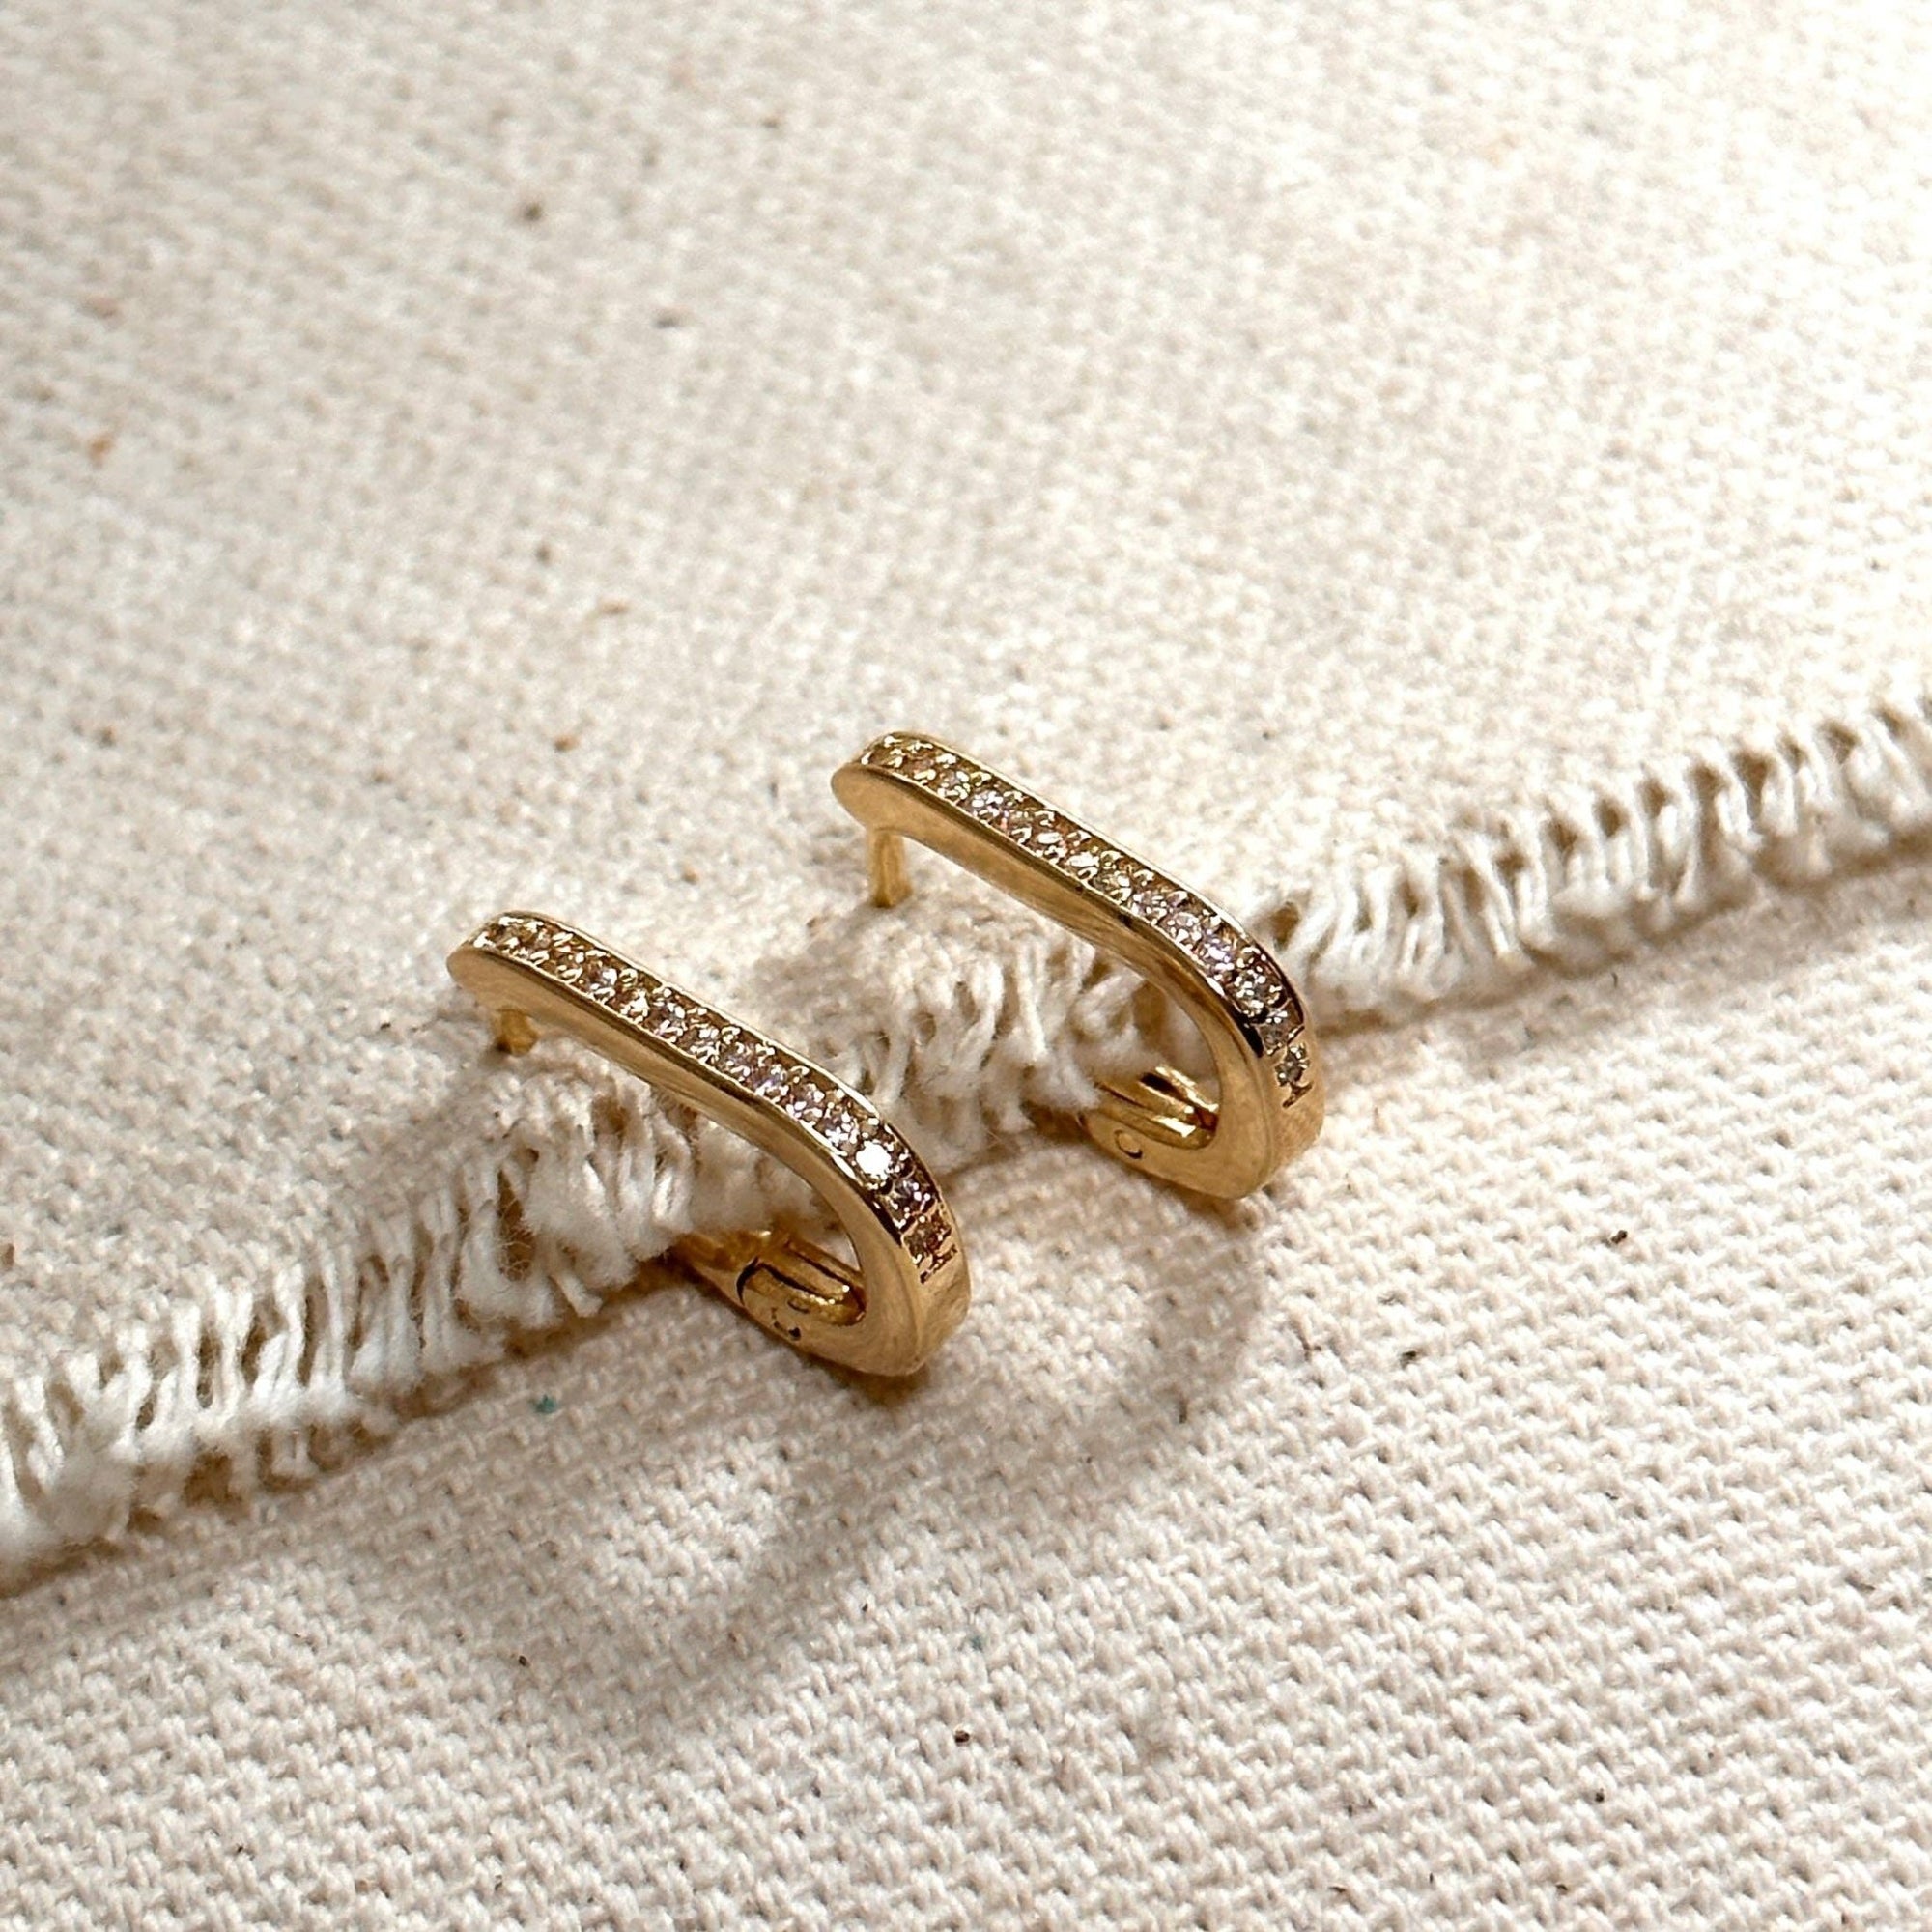 Micro CZ Rectangle Clicker Earrings, 18k Gold Filled, Abigail Fox Jewelry Collection - Abigail Fox Designs